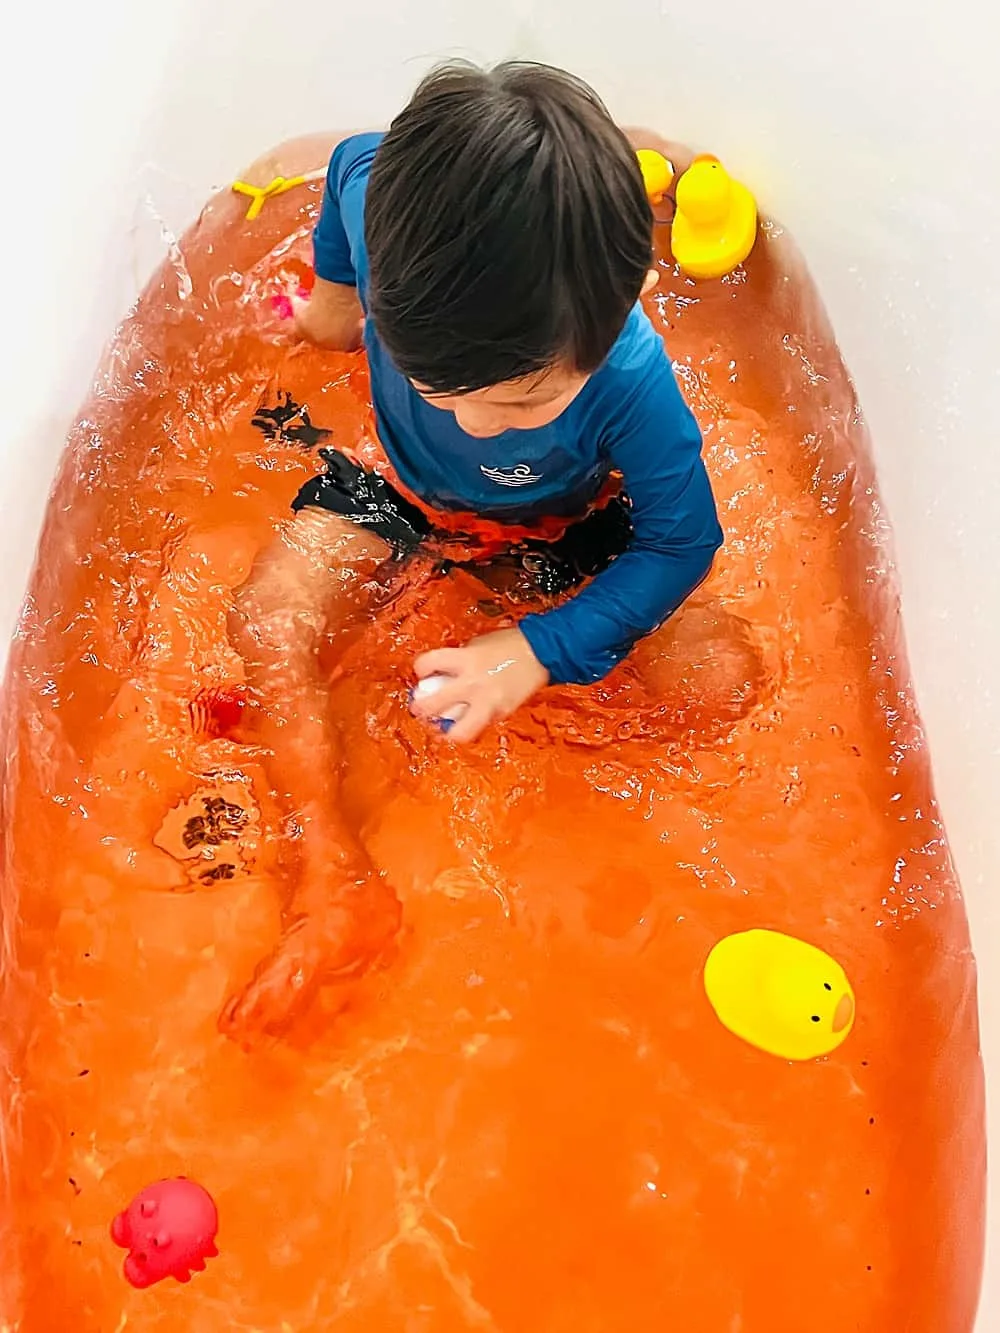 CRAYOLA BATH DROPS review and Bath time KID FUN - COLOR BATH DROPZ water!  Brother attacks sister 